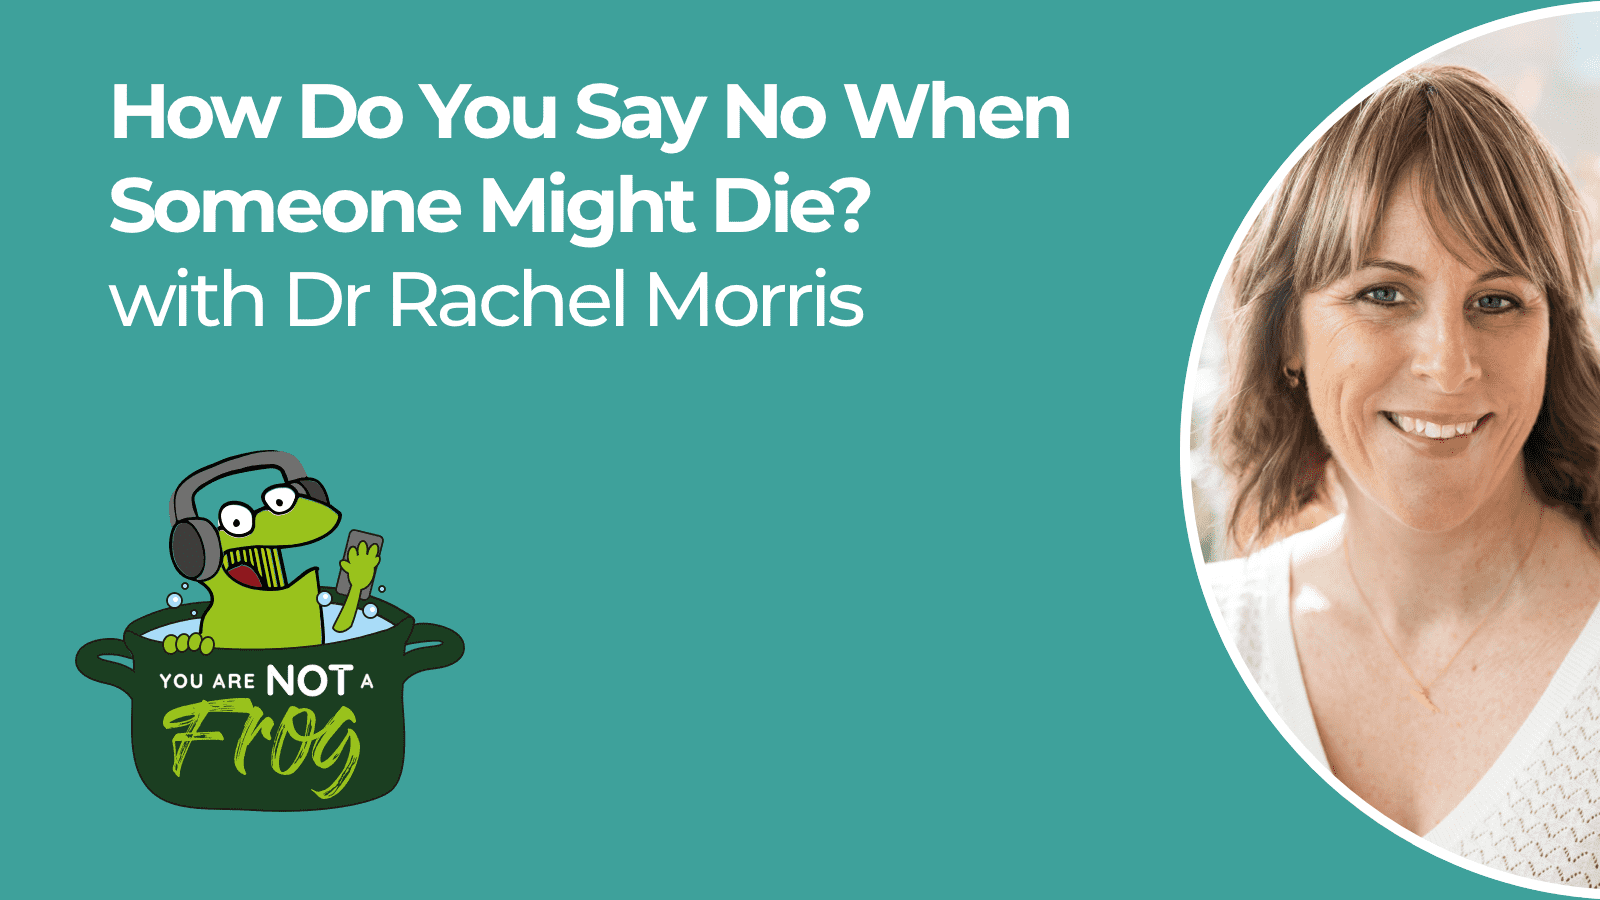 How Do You Say No When Someone Might Die?